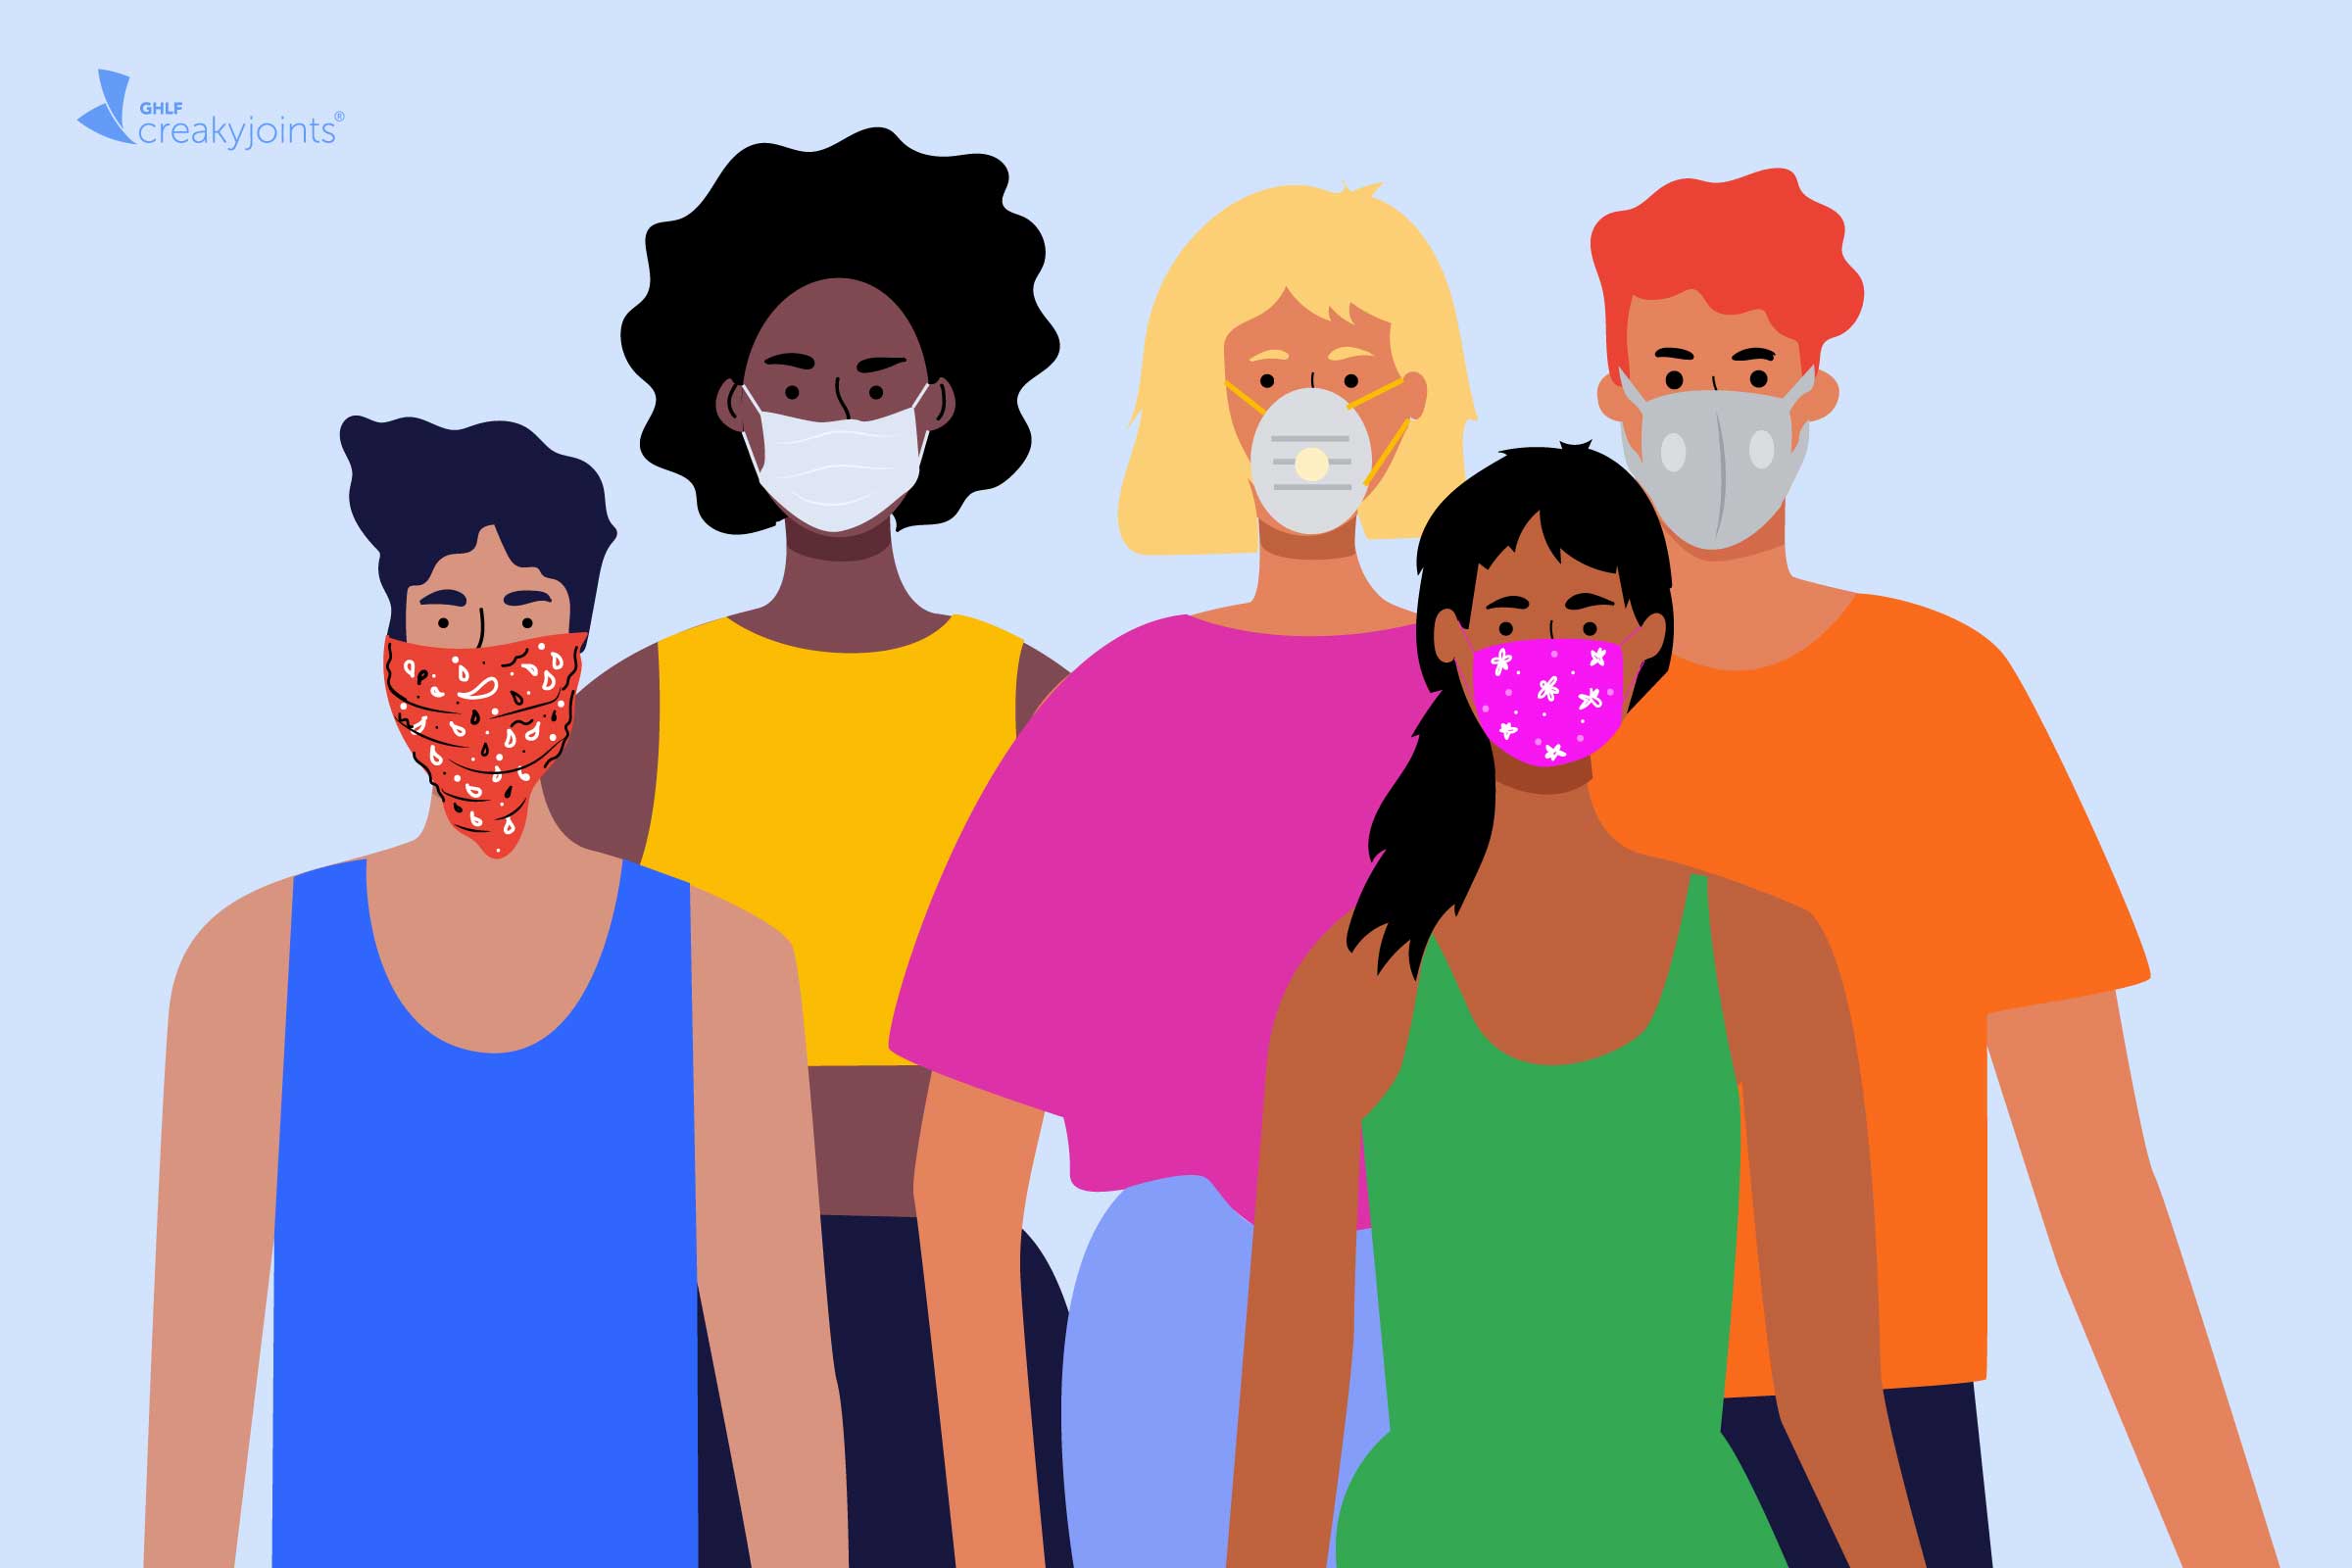 Cartoon image of a diverse group of people wearing different styles of face coverings